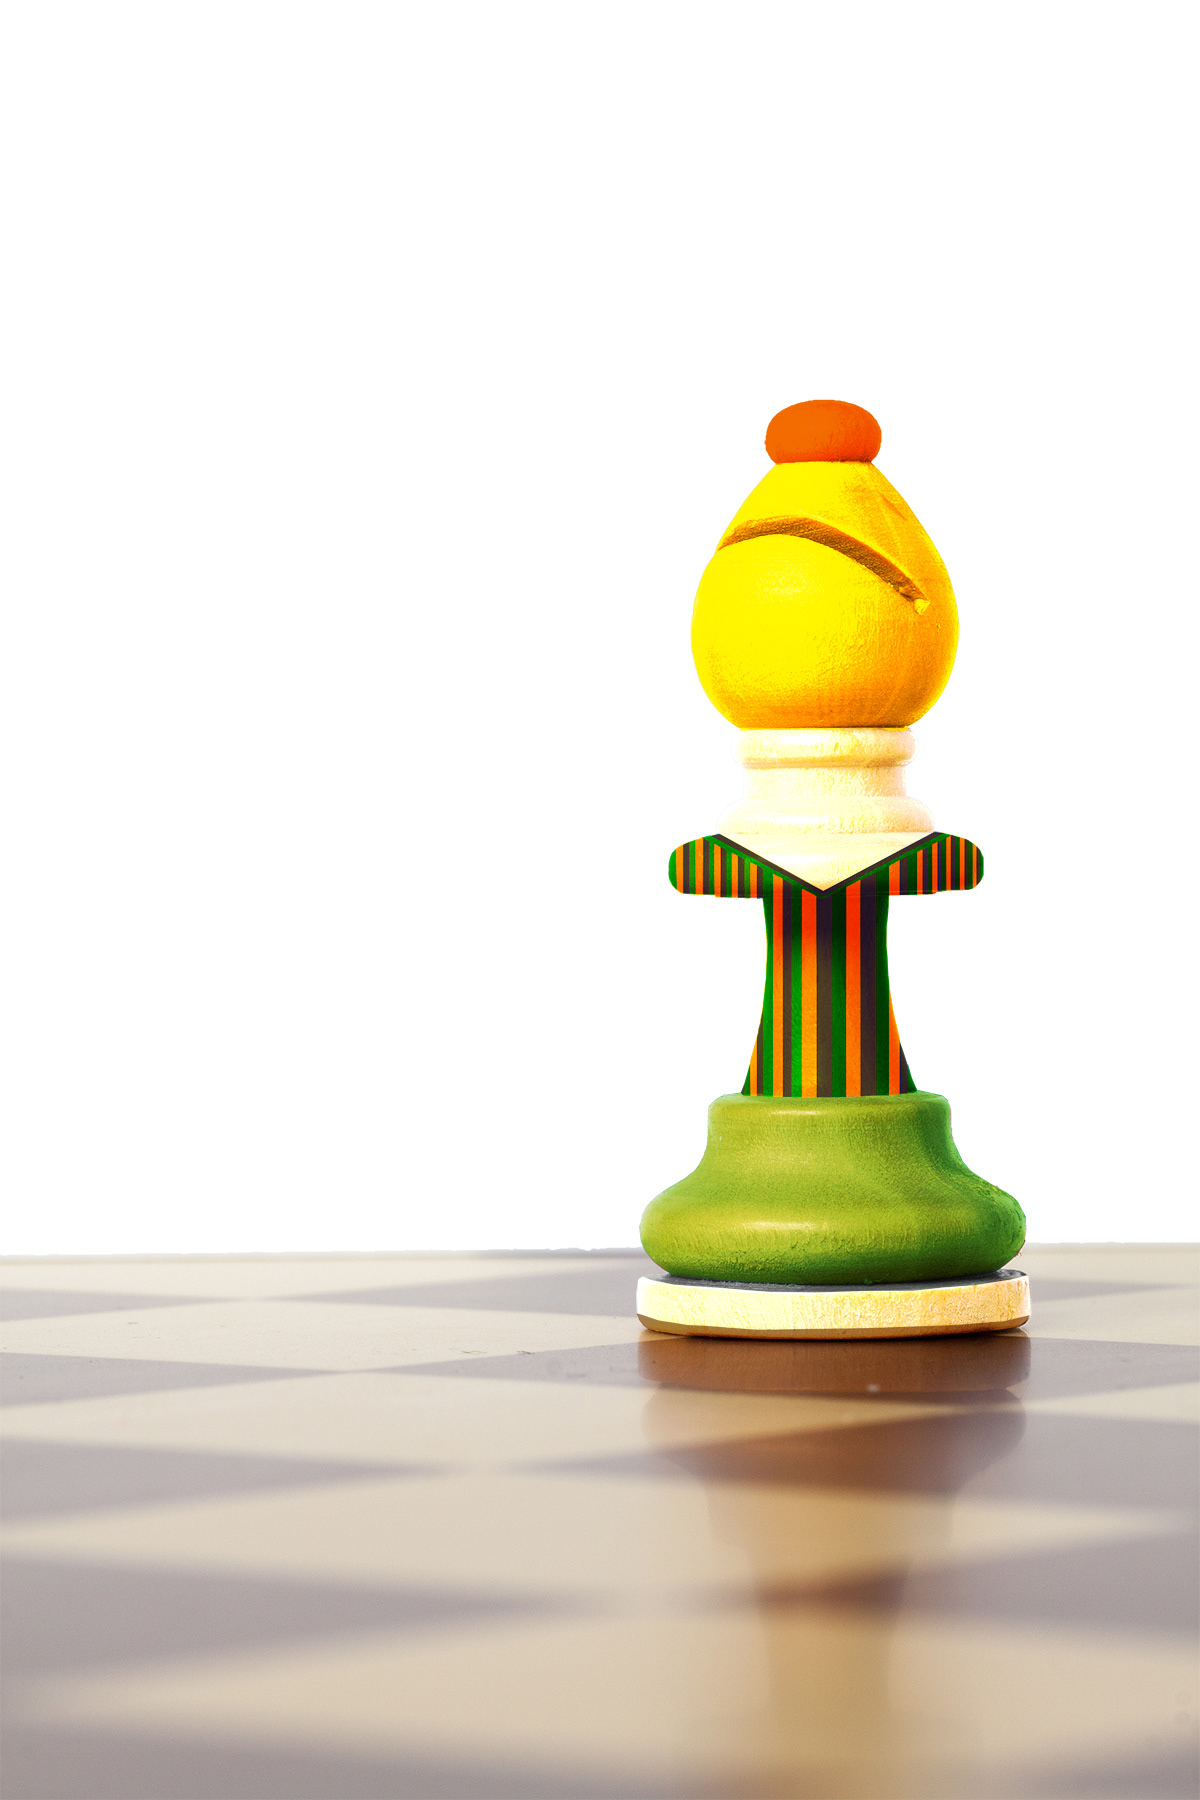 Bishop chess piece illustrated to look like Bert from Sesame Street